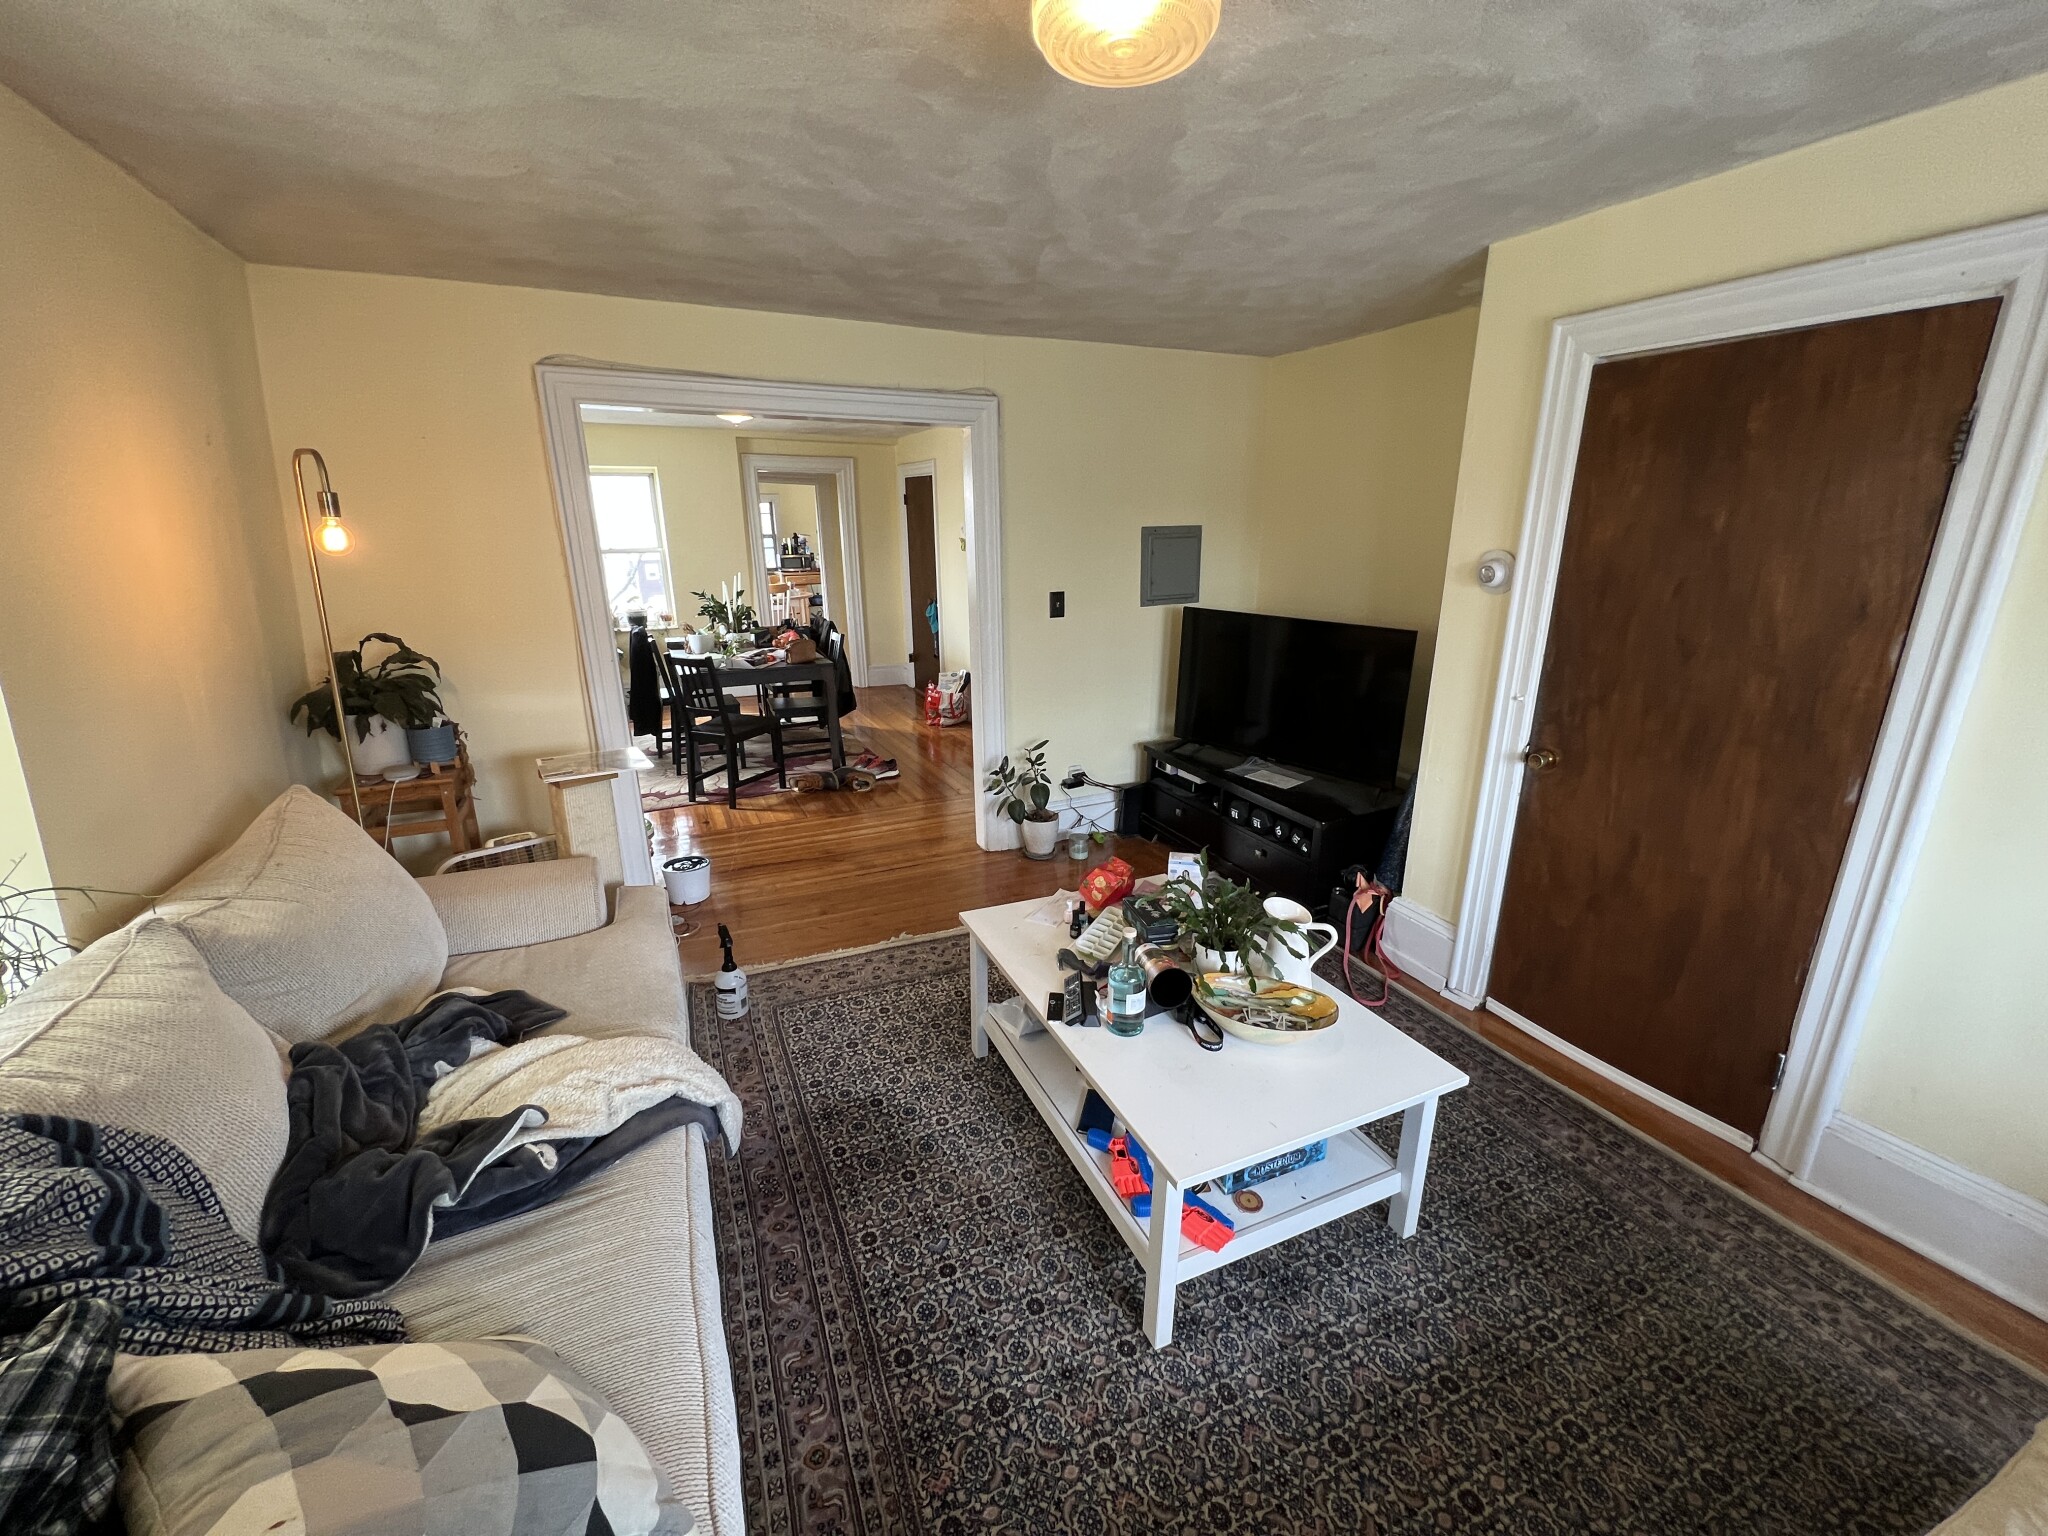 Photos of apartment on Upland Rd.,Somerville MA 02144